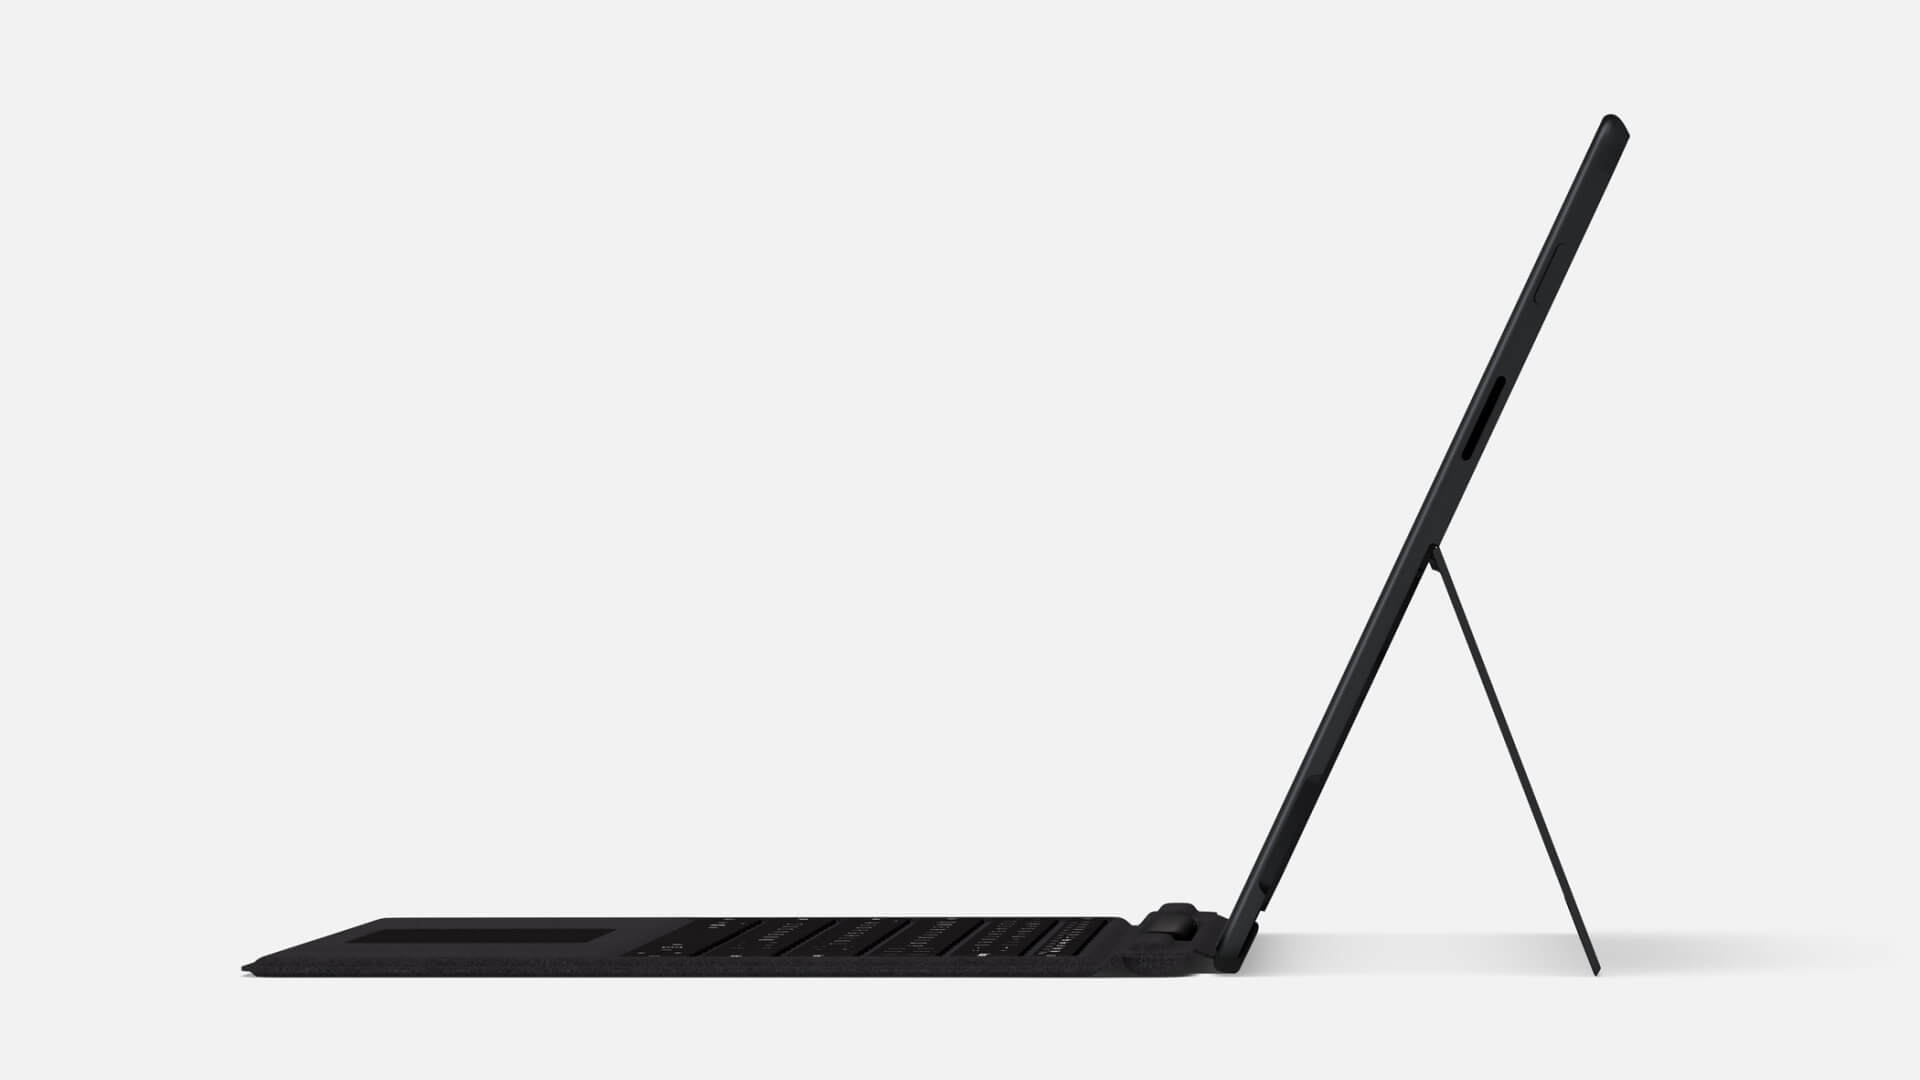 Microsoft launches new eye contact function for the Surface Pro X.